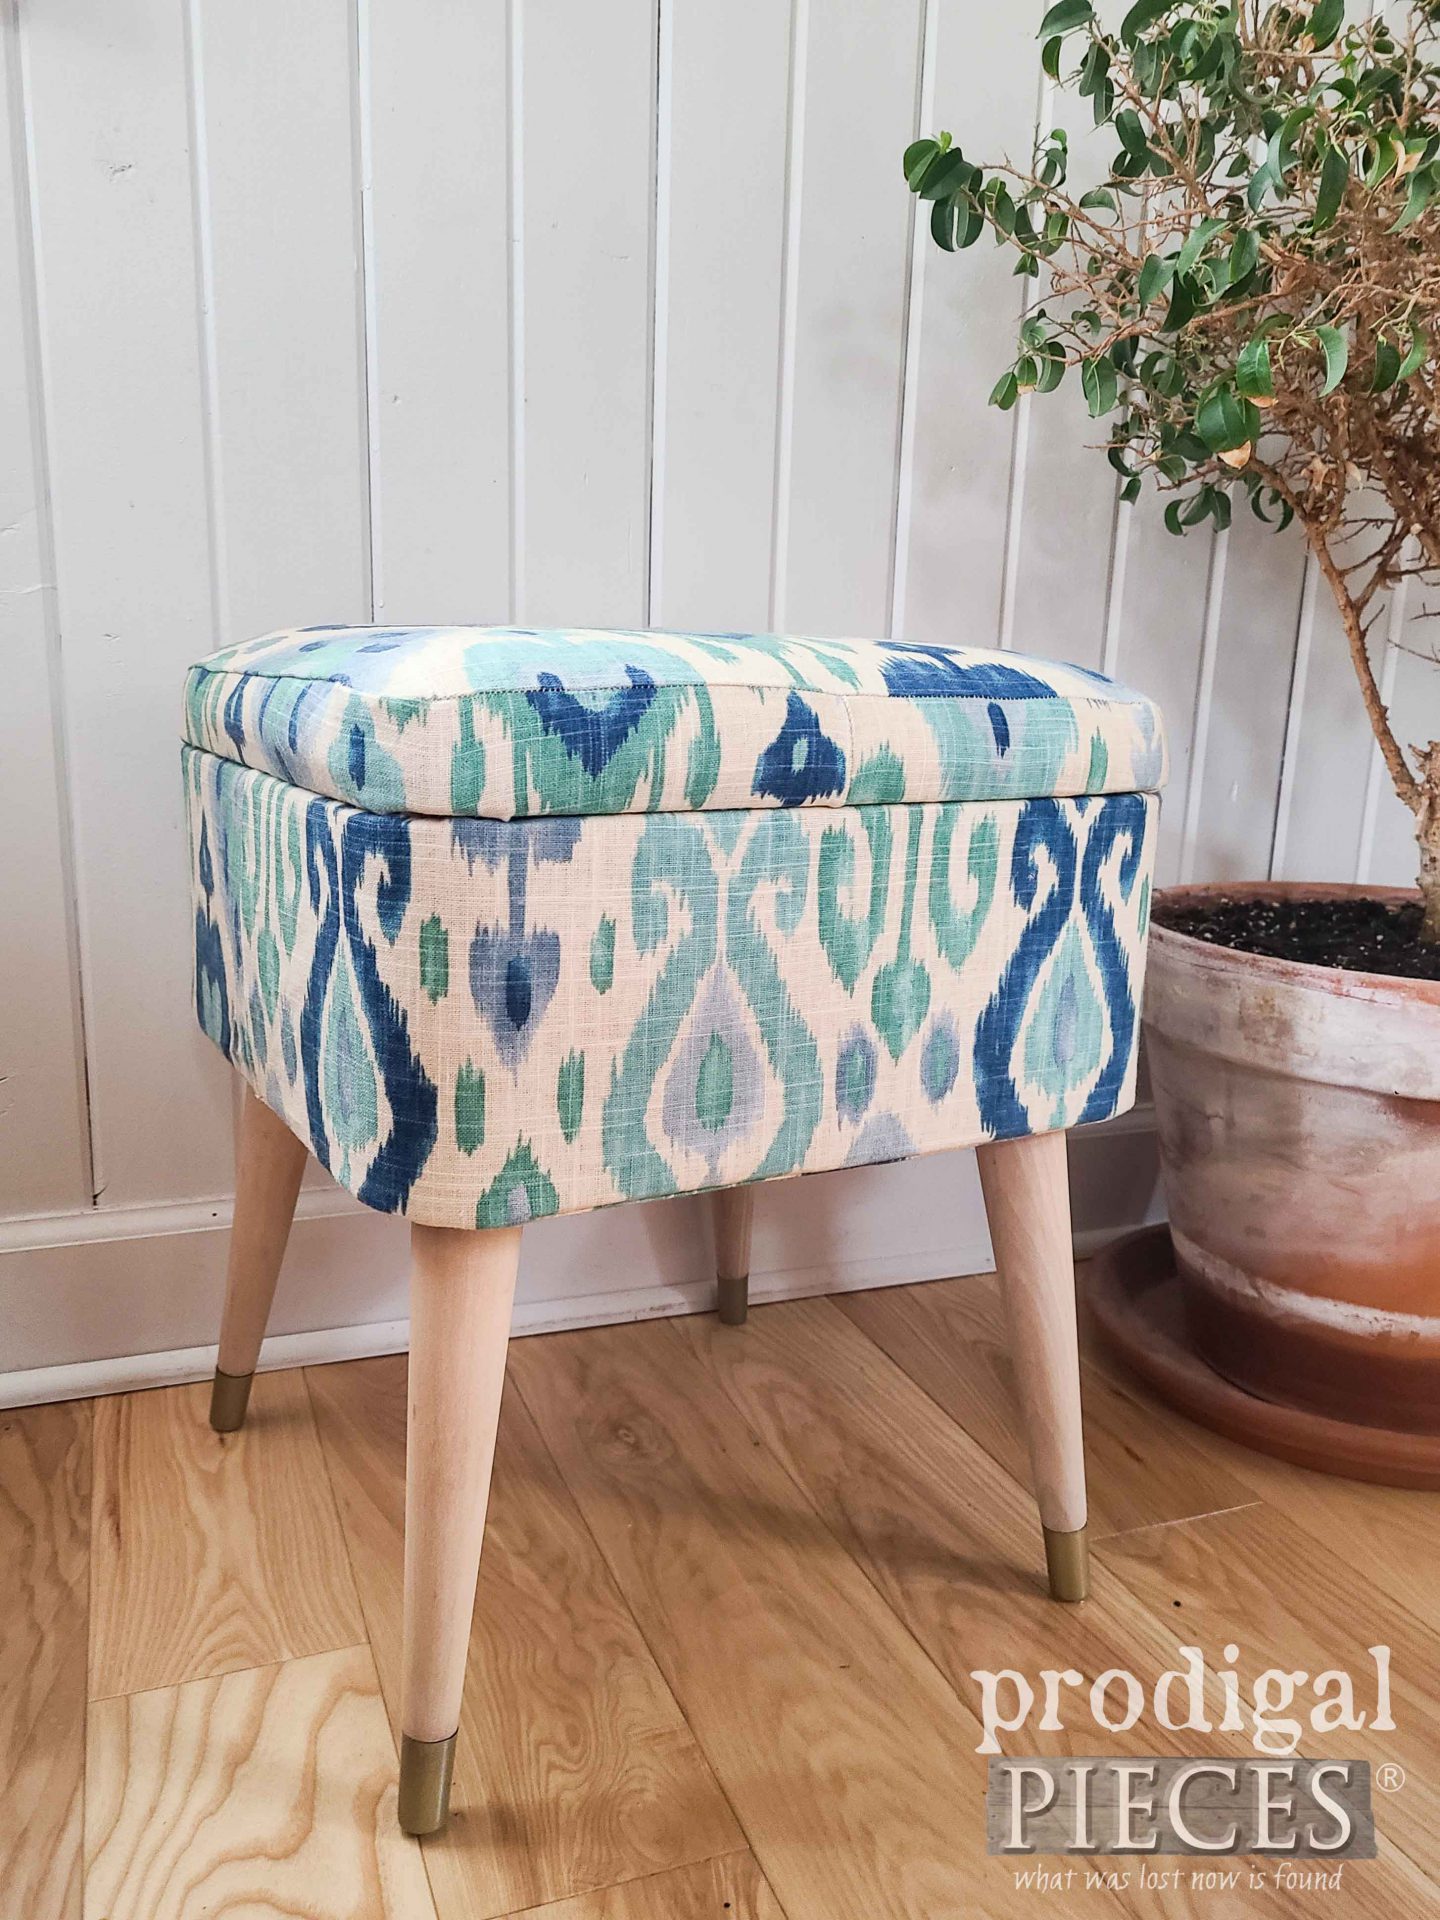 Vintage Mid Centurn Modern Ikat Fabric Sewing Stool by Larissa of Prodigal Pieces | prodigalpieces.com #prodigalpieces #vintage #diy #furniture